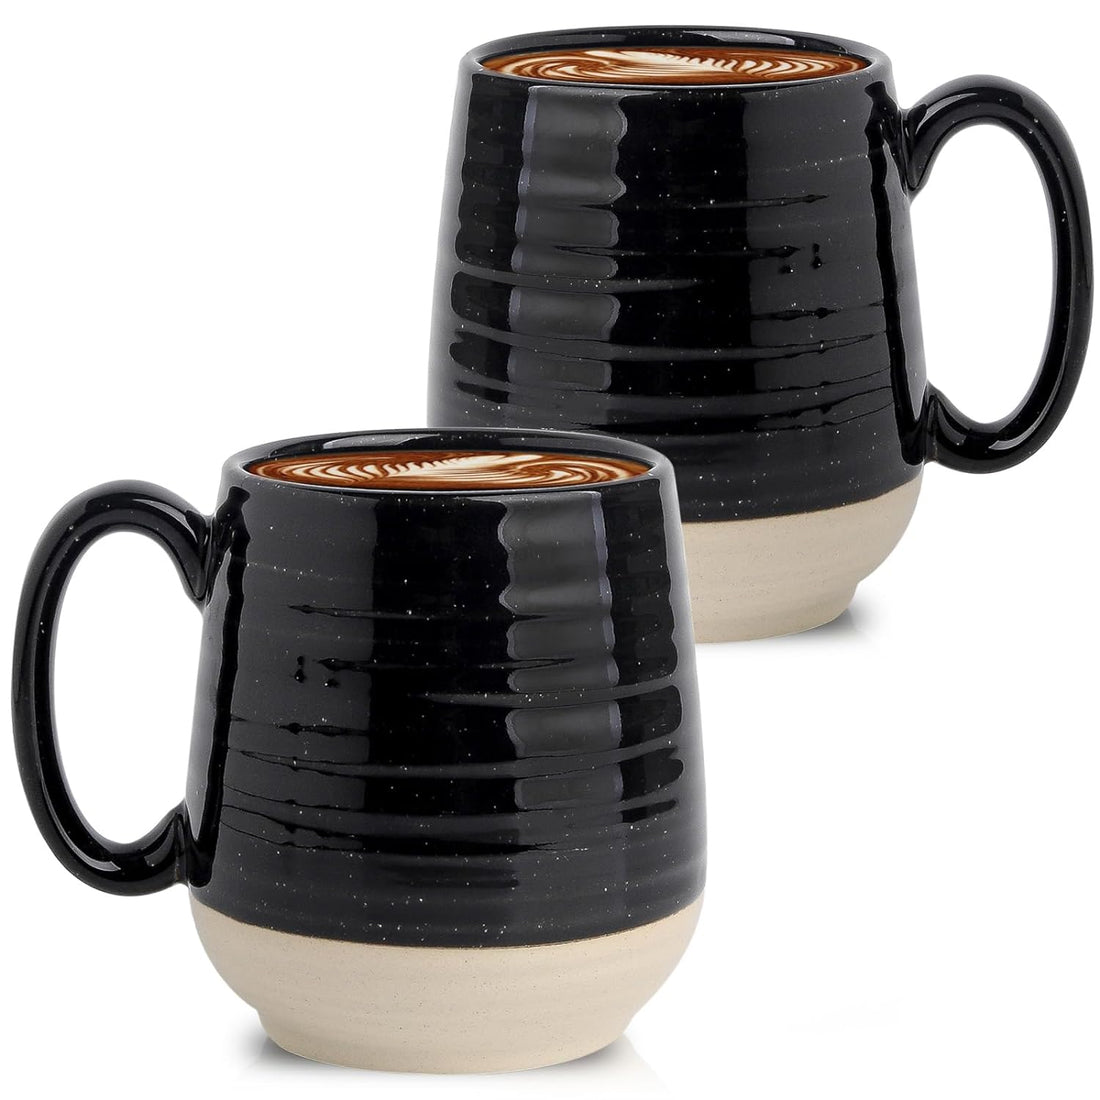 Hasense Coffee Mugs Set of 2, 20 oz Coffee Cups Ceramic, Big Tea Cup with Comfortable Handle, Black Coffee Mug Set for Office and Home, Ideal for Latte Soup Tea Mike, Dishwasher Microwave Safe